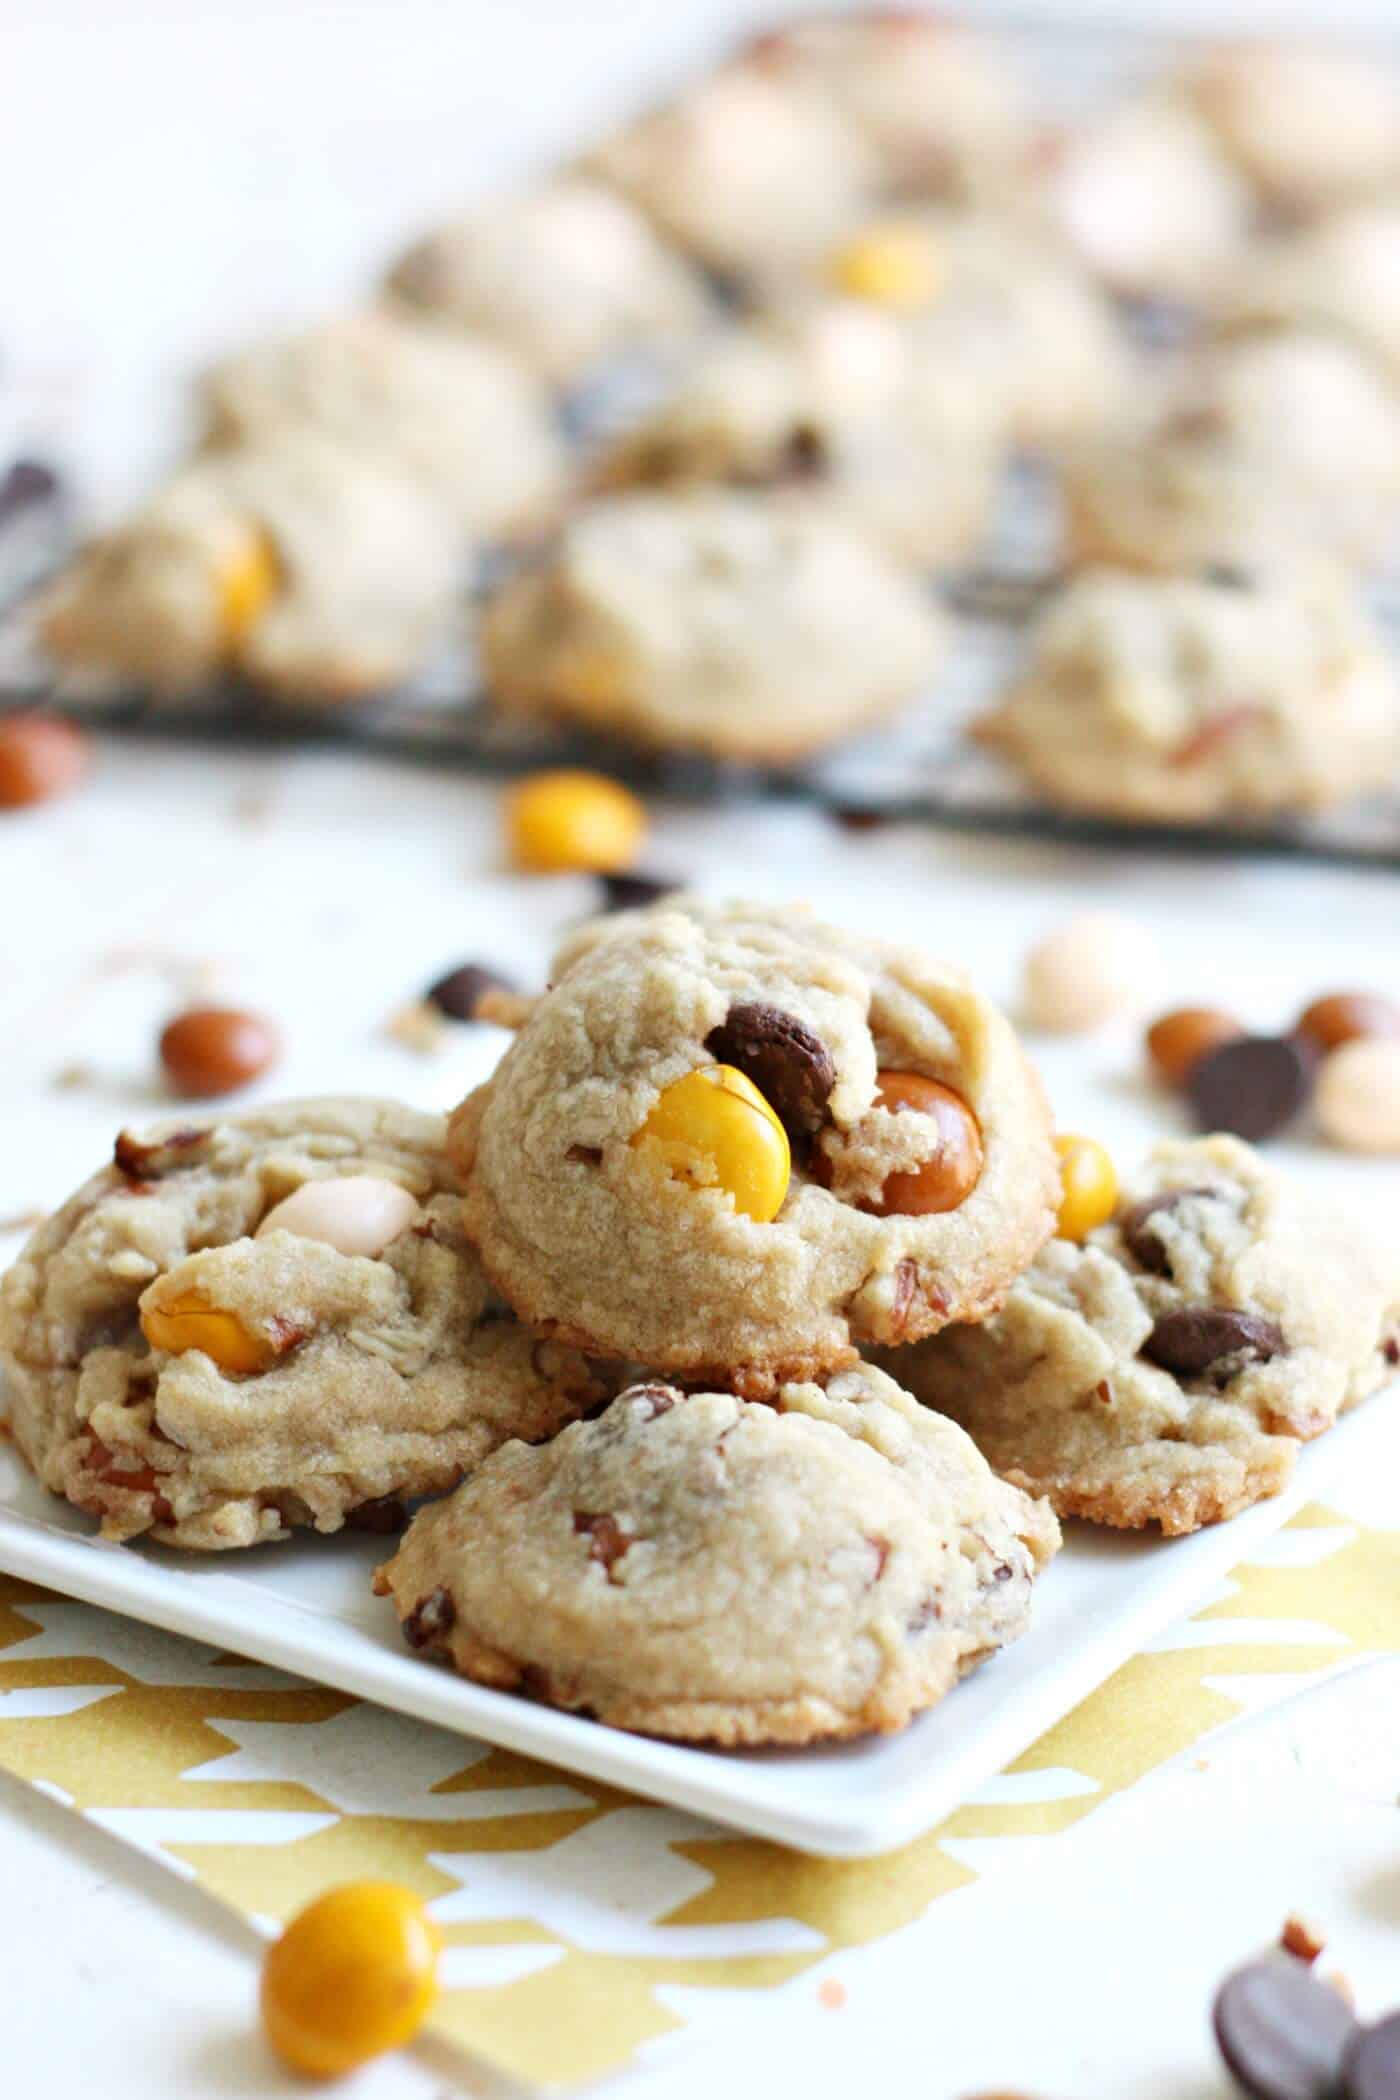 These delicious dark chocolate chip cookies include white chocolate butterscotch M&M's and yummy pecans. The perfect way to jazz up a plain cookie recipe!